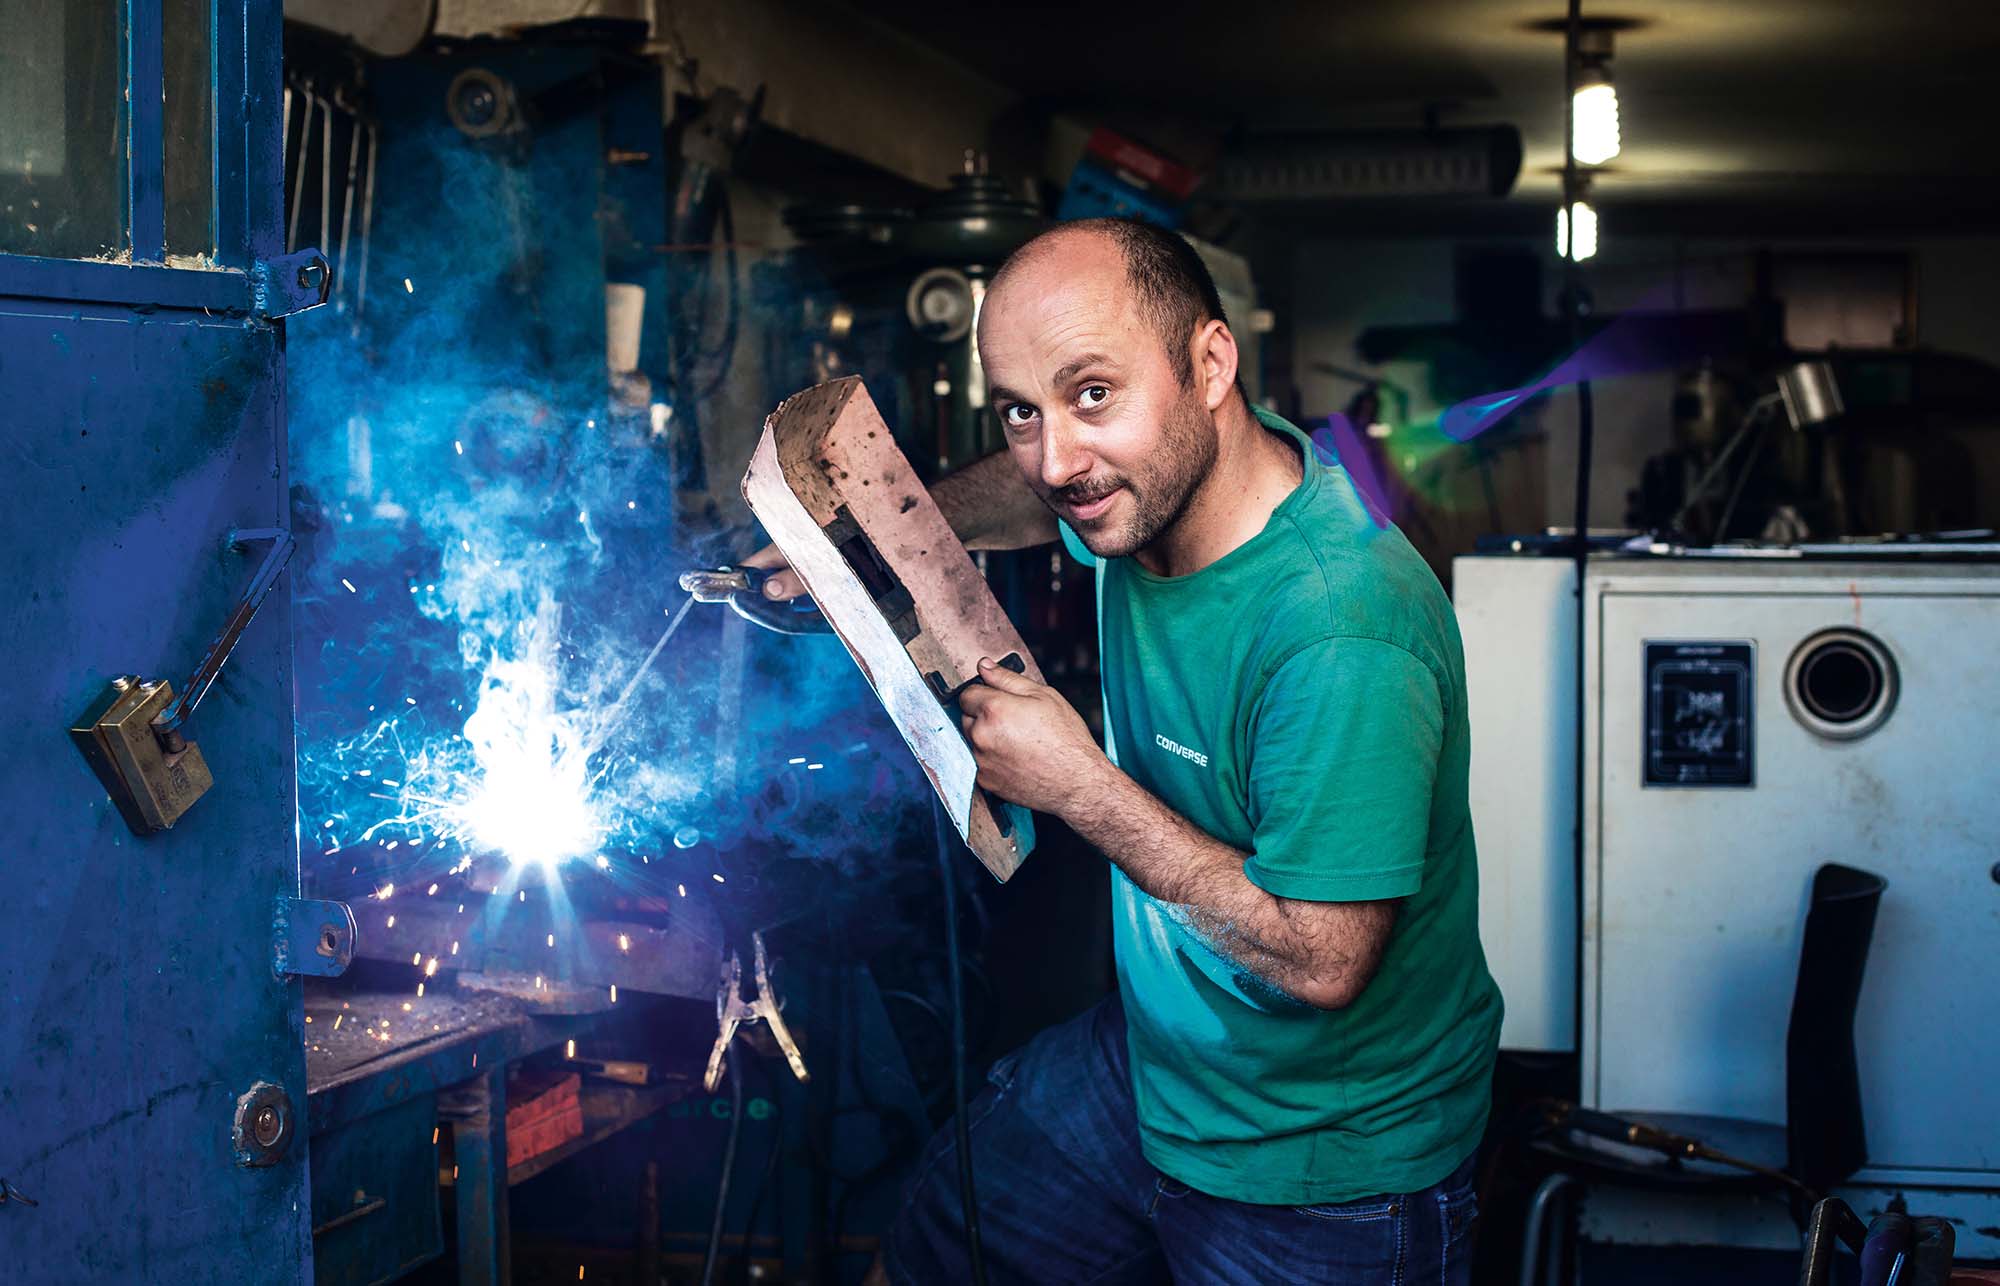 Man smiling behind welding mask as he turns to look at camera while working on industrial job